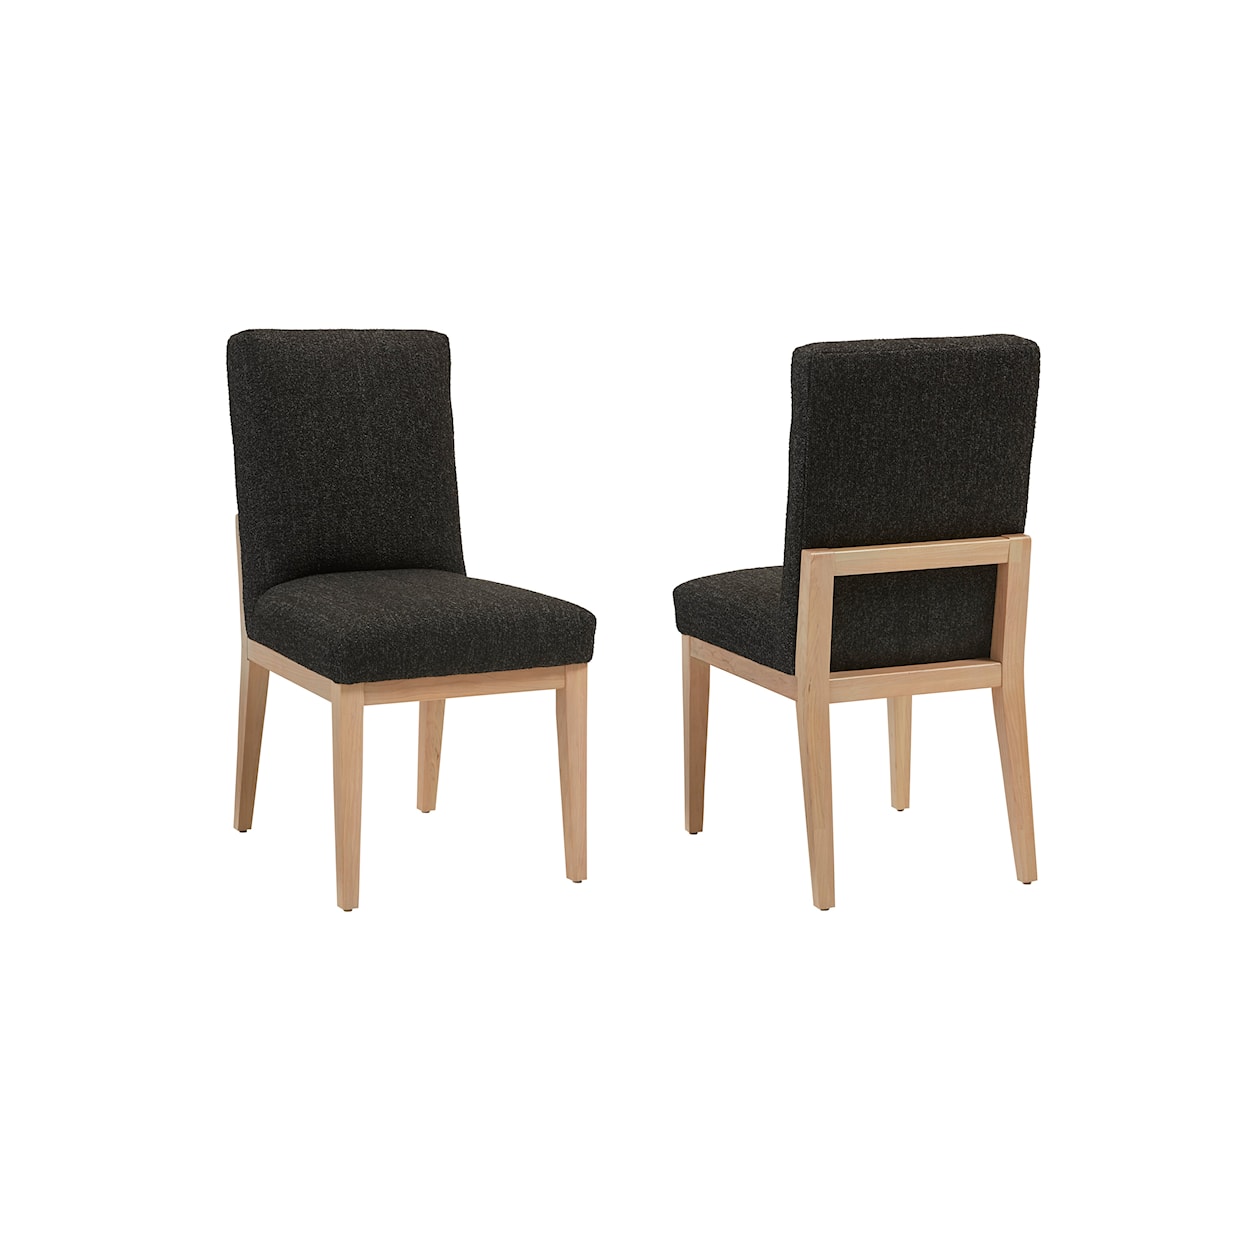 Artisan & Post Crafted Cherry Upholstered Side Dining Chair